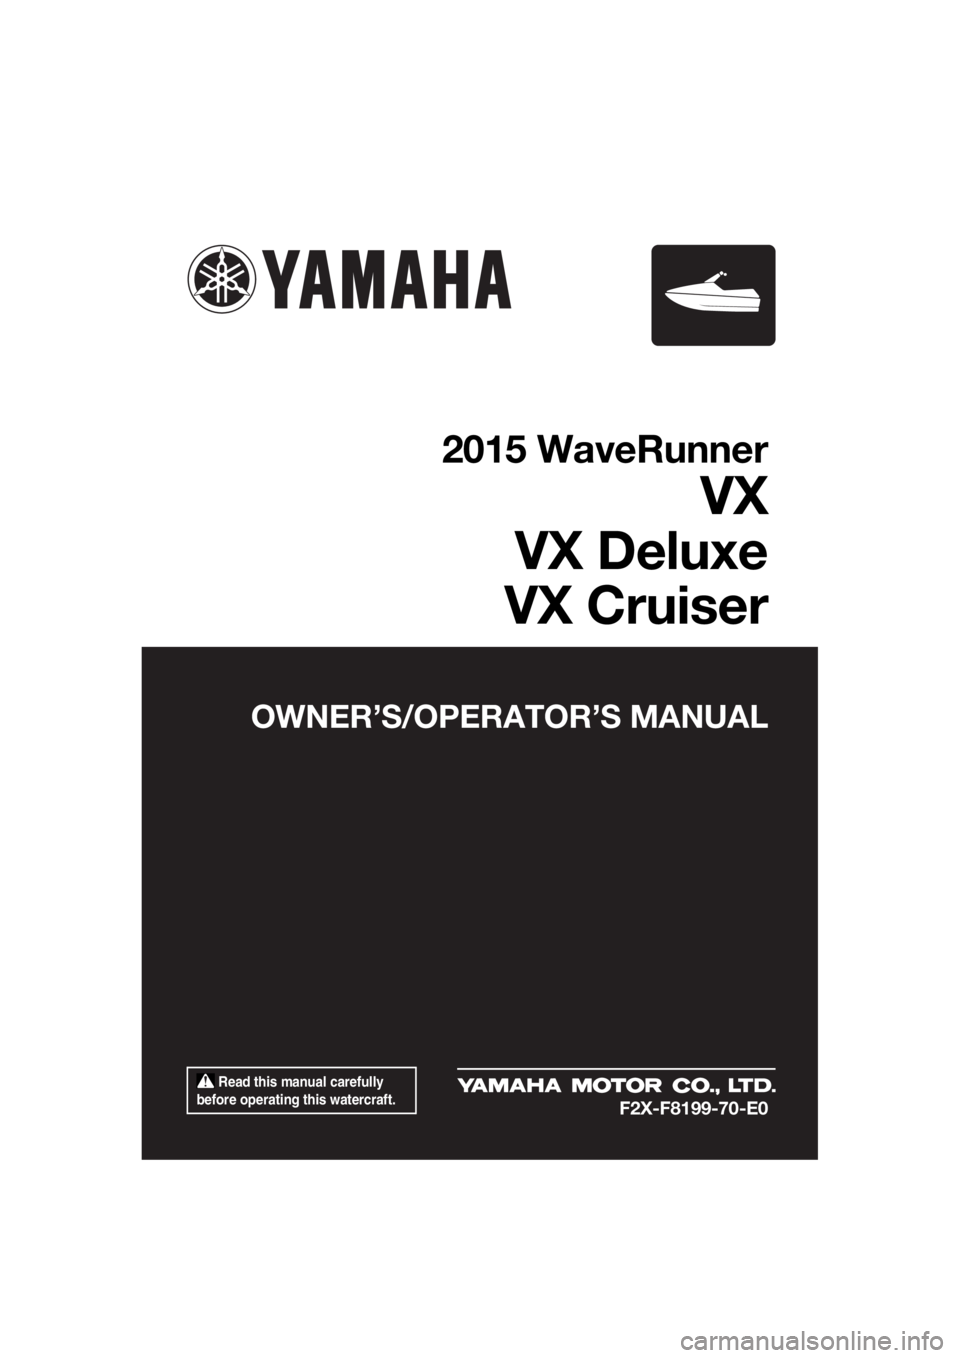 YAMAHA VX 2015  Owners Manual  Read this manual carefully 
before operating this watercraft.
OWNER’S/OPERATOR’S MANUAL
2015 WaveRunner
VX
VX Deluxe
VX Cruiser
F2X-F8199-70-E0
UF2X70E0.book  Page 1  Monday, December 7, 2015  4: